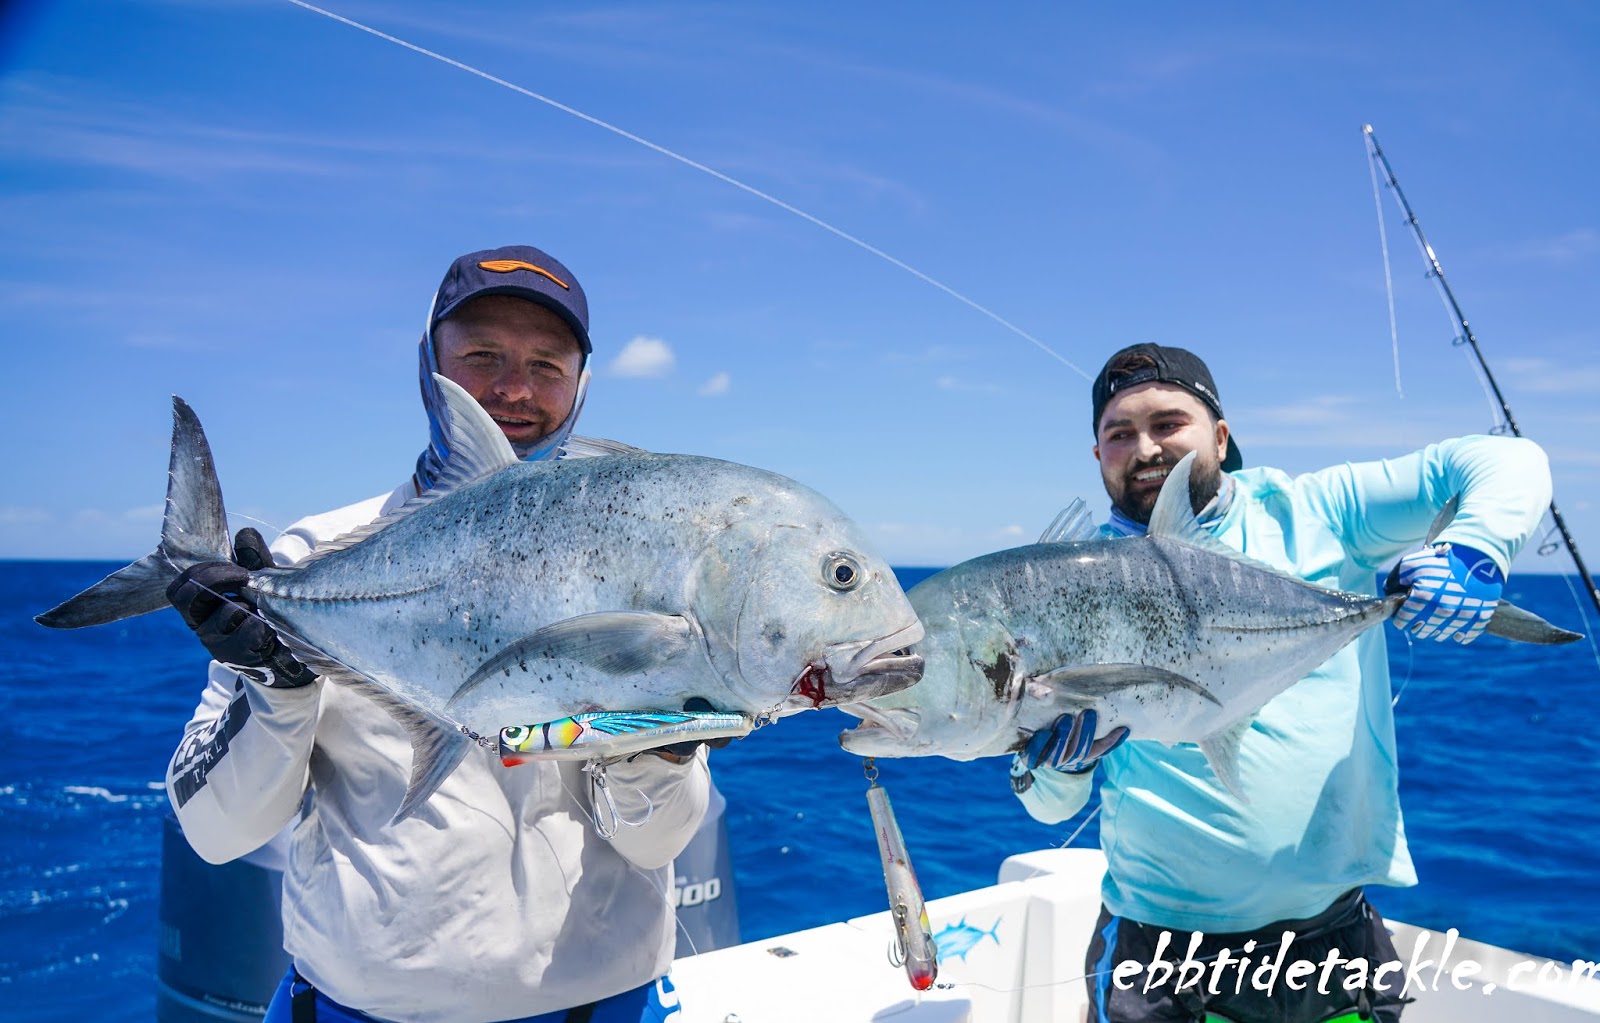 EBB TIDE TACKLE - The BLOG: Tydeman Reef with East Coast Angling